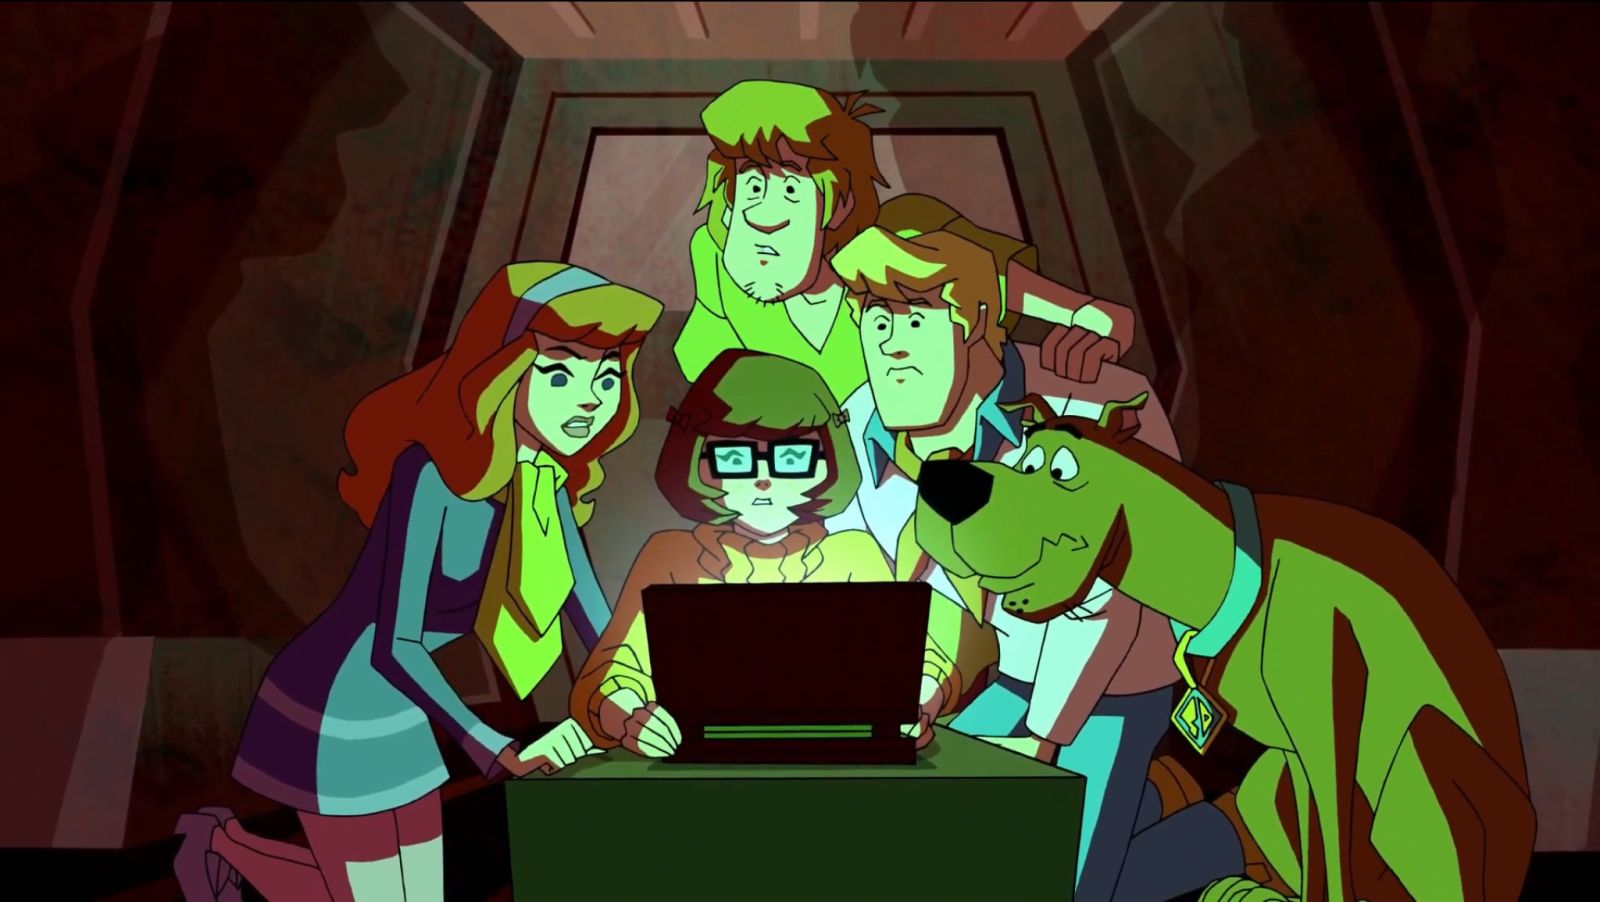 Scooby-Doo! Mystery Incorporated (Phần 2)